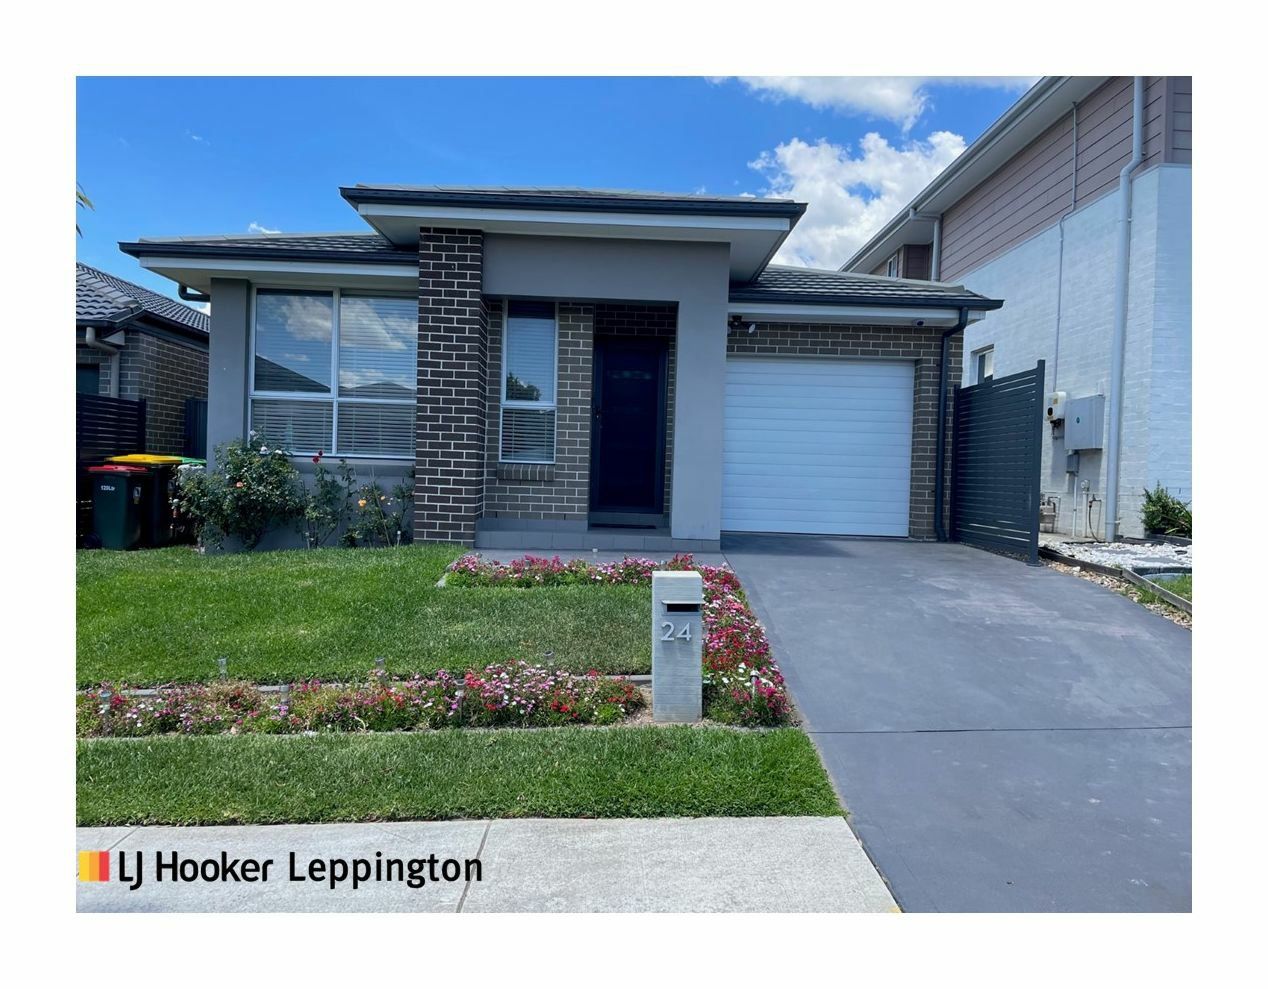 3 bedrooms House in 24 Rover Street LEPPINGTON NSW, 2179